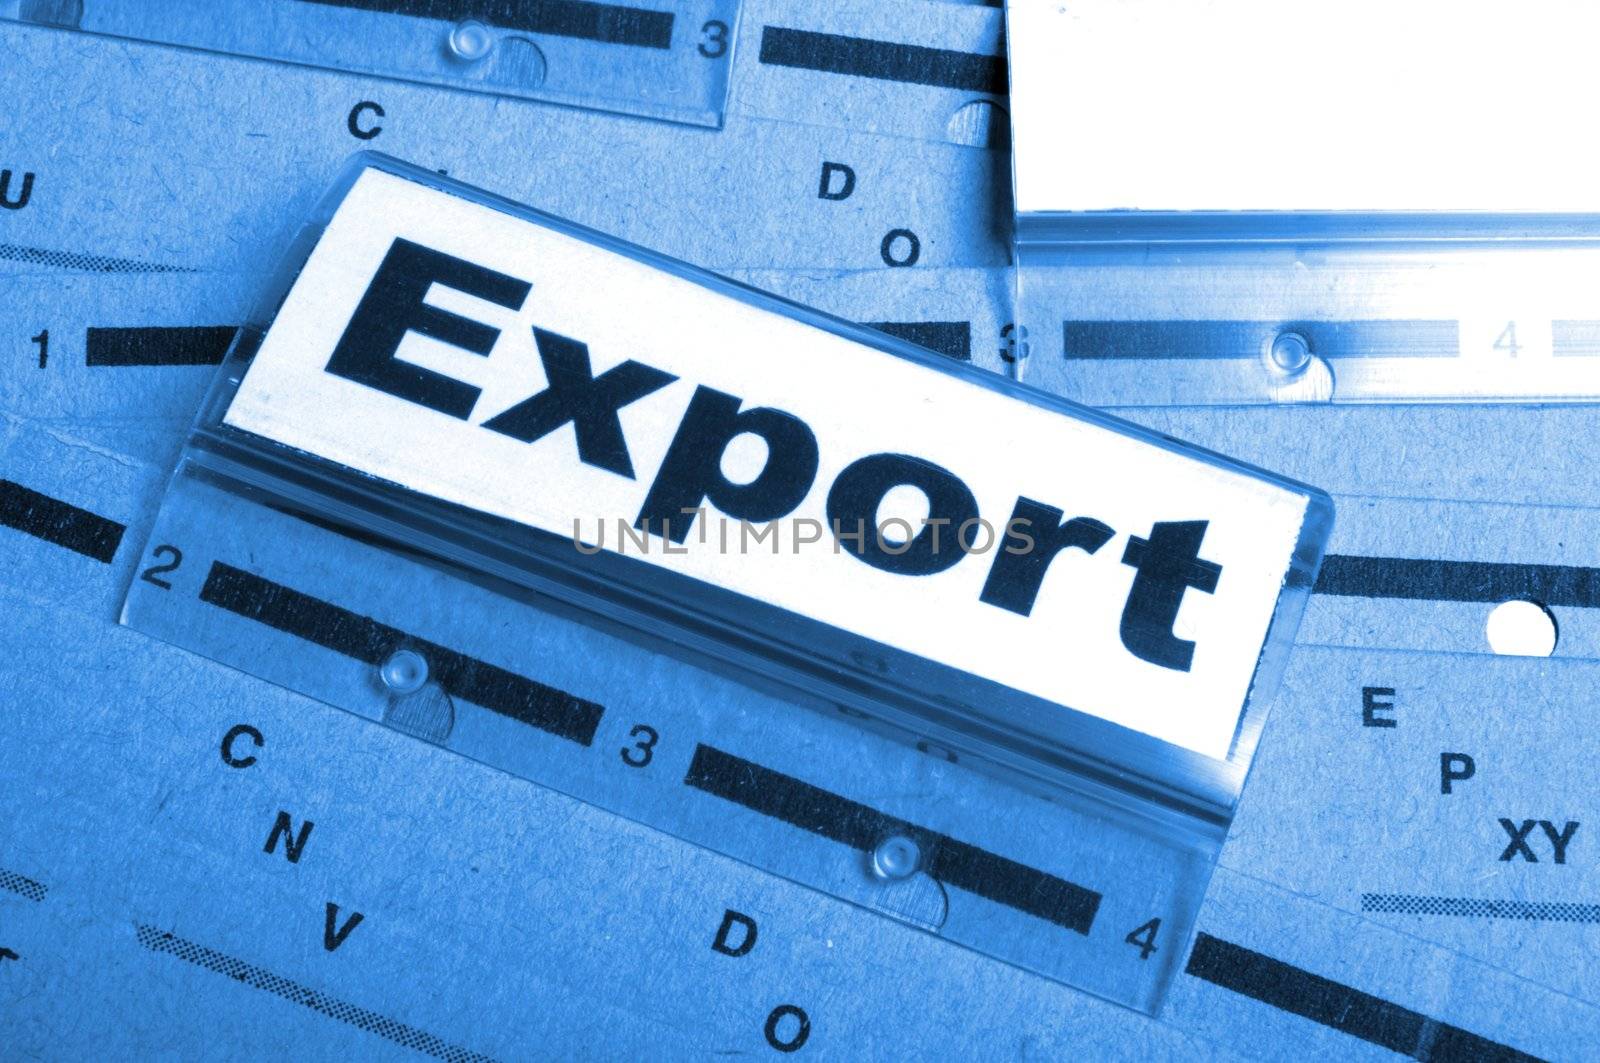 export word on business folder showing globalization trade or paperwork concept